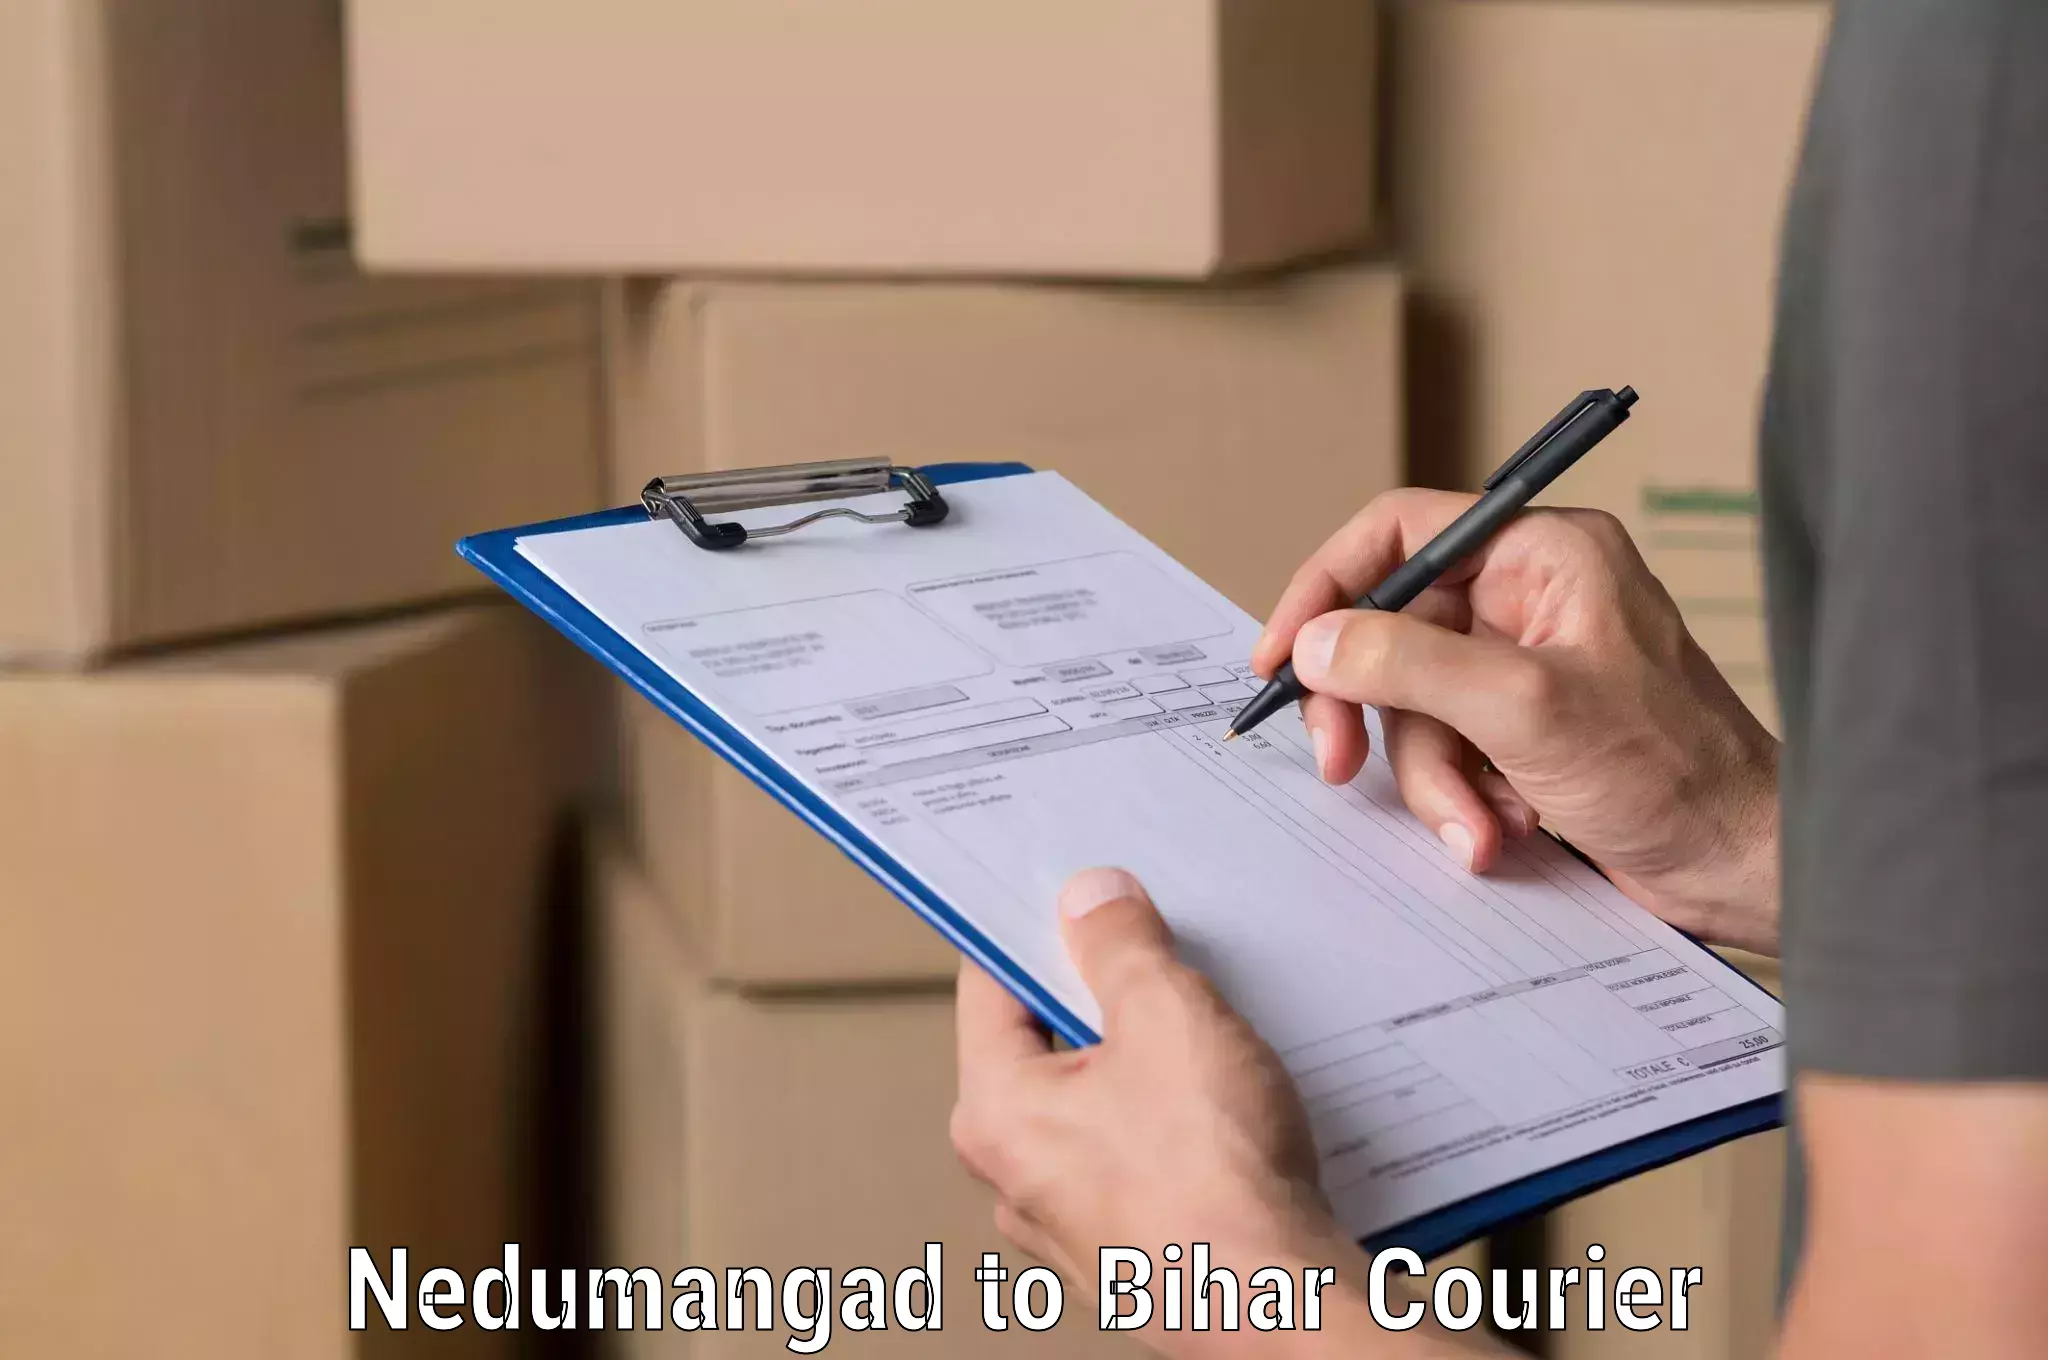 Express courier capabilities Nedumangad to Sandesh